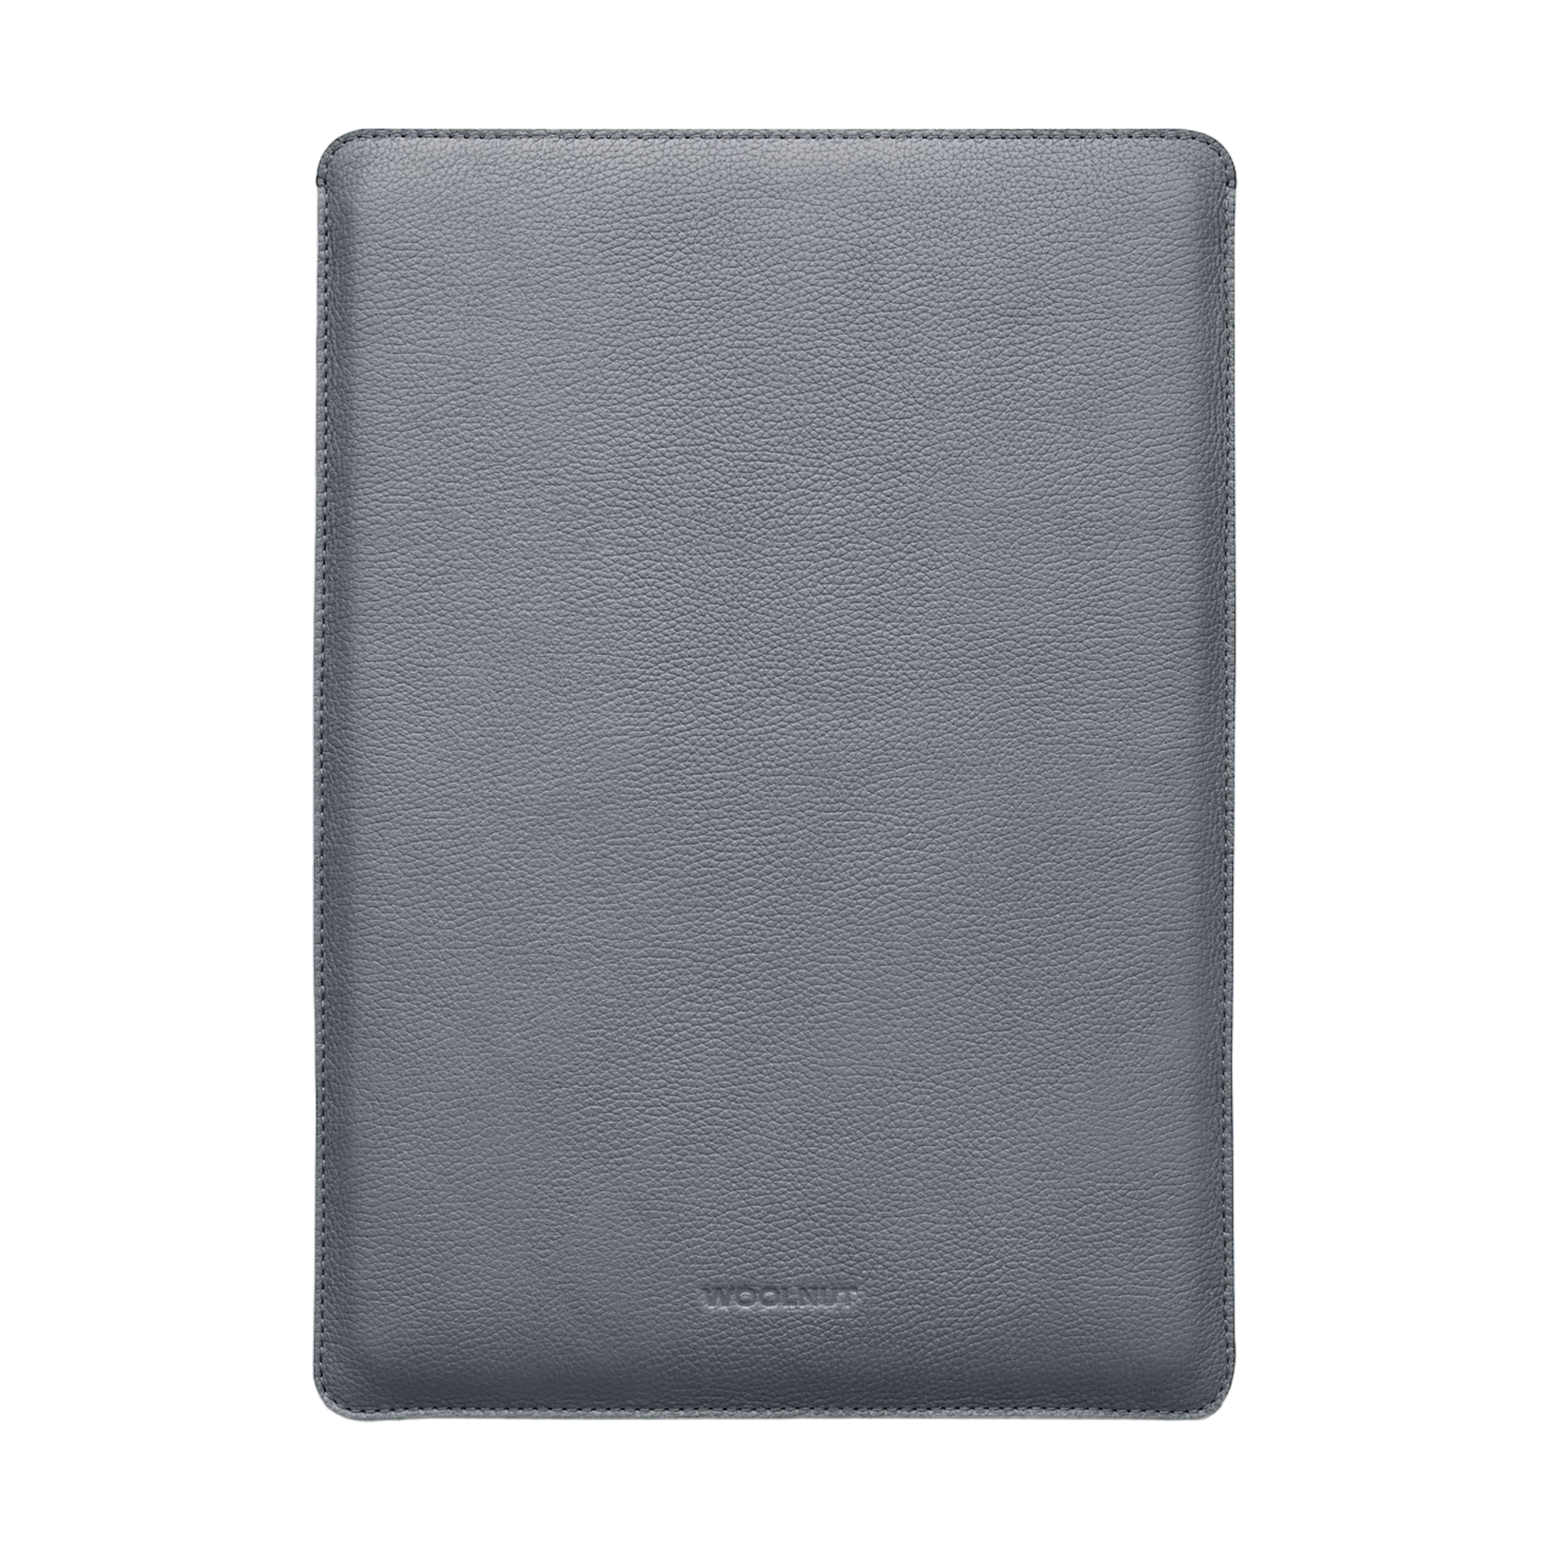 WOOLNUT Leather Sleeve for 15-Inch MacBook Air - Grey